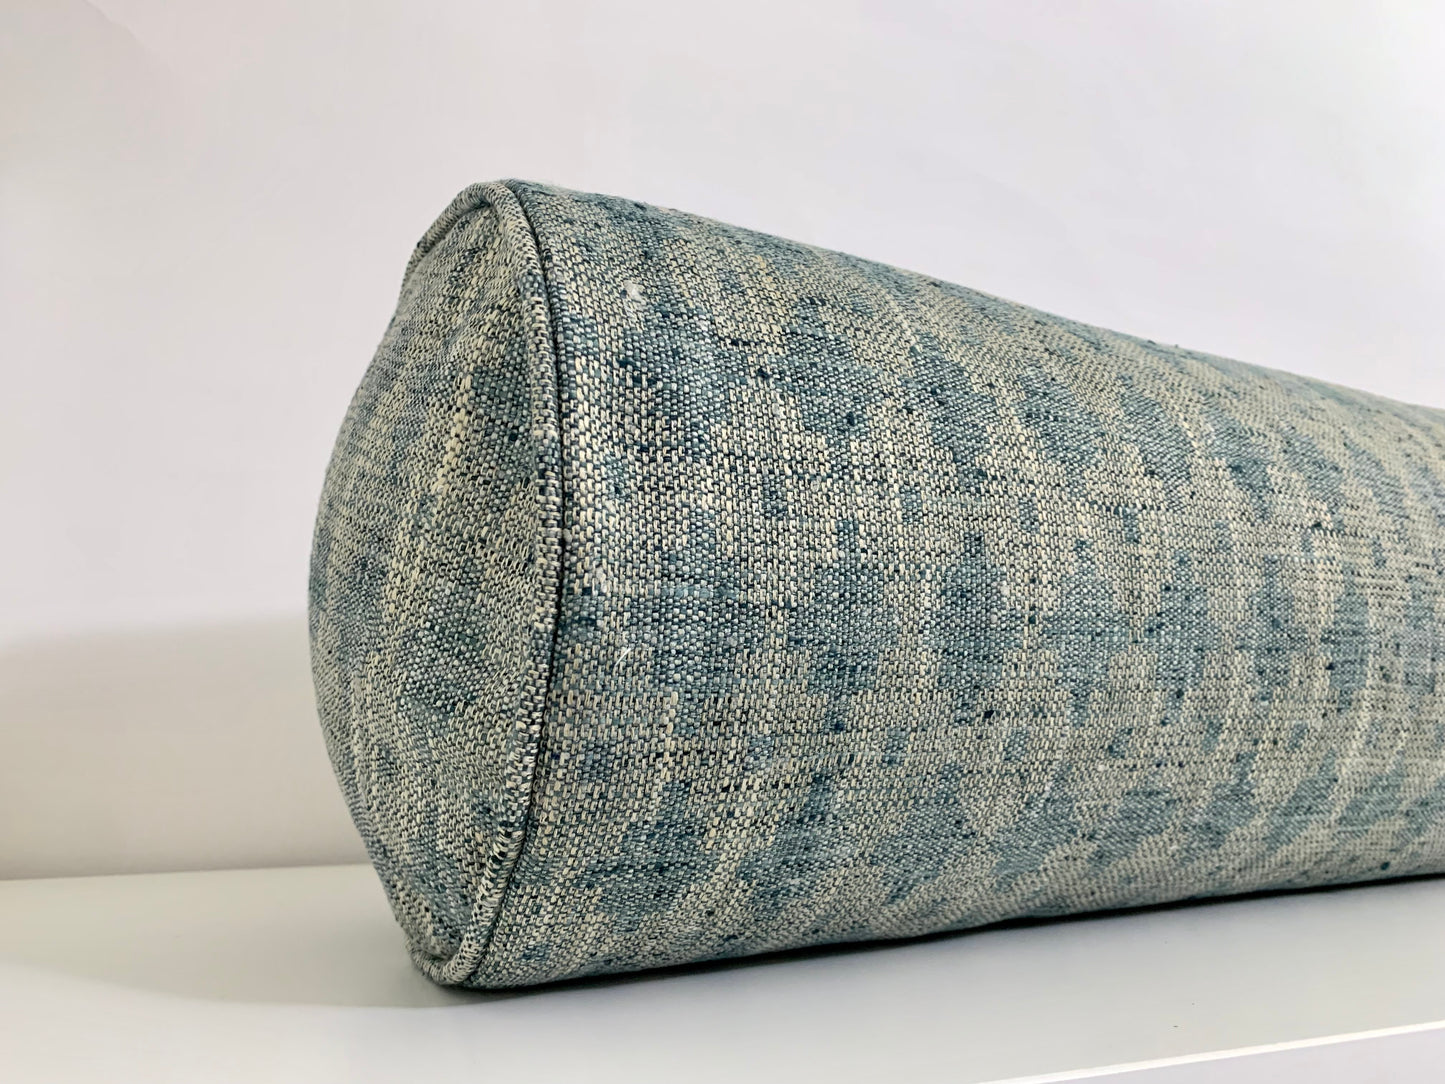 Bohemian Azure Pillow Cover - Available in Bolster, Throw, Lumbar, and Euro Sham Sizes Available